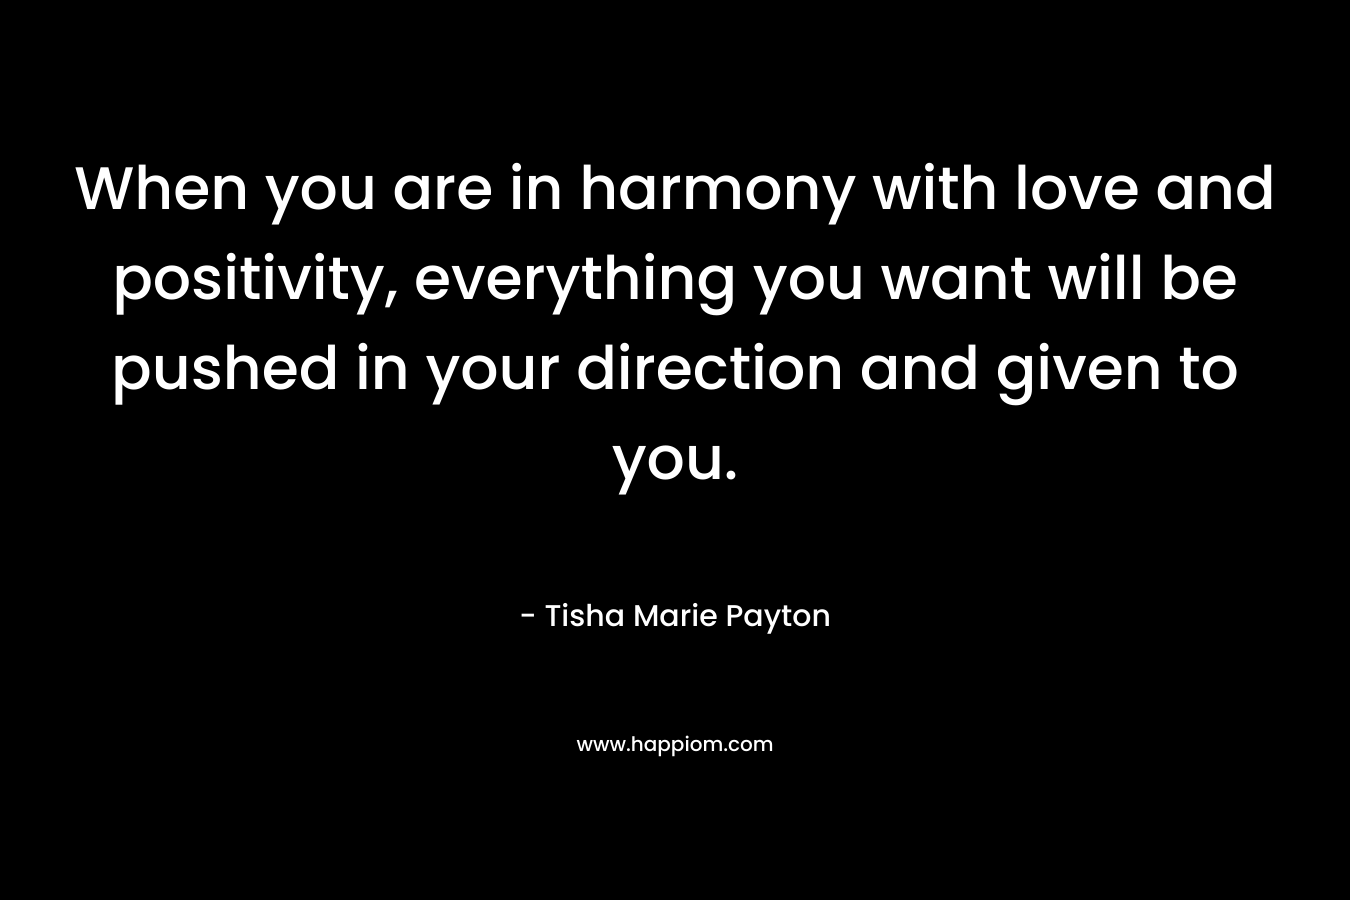 When you are in harmony with love and positivity, everything you want will be pushed in your direction and given to you.